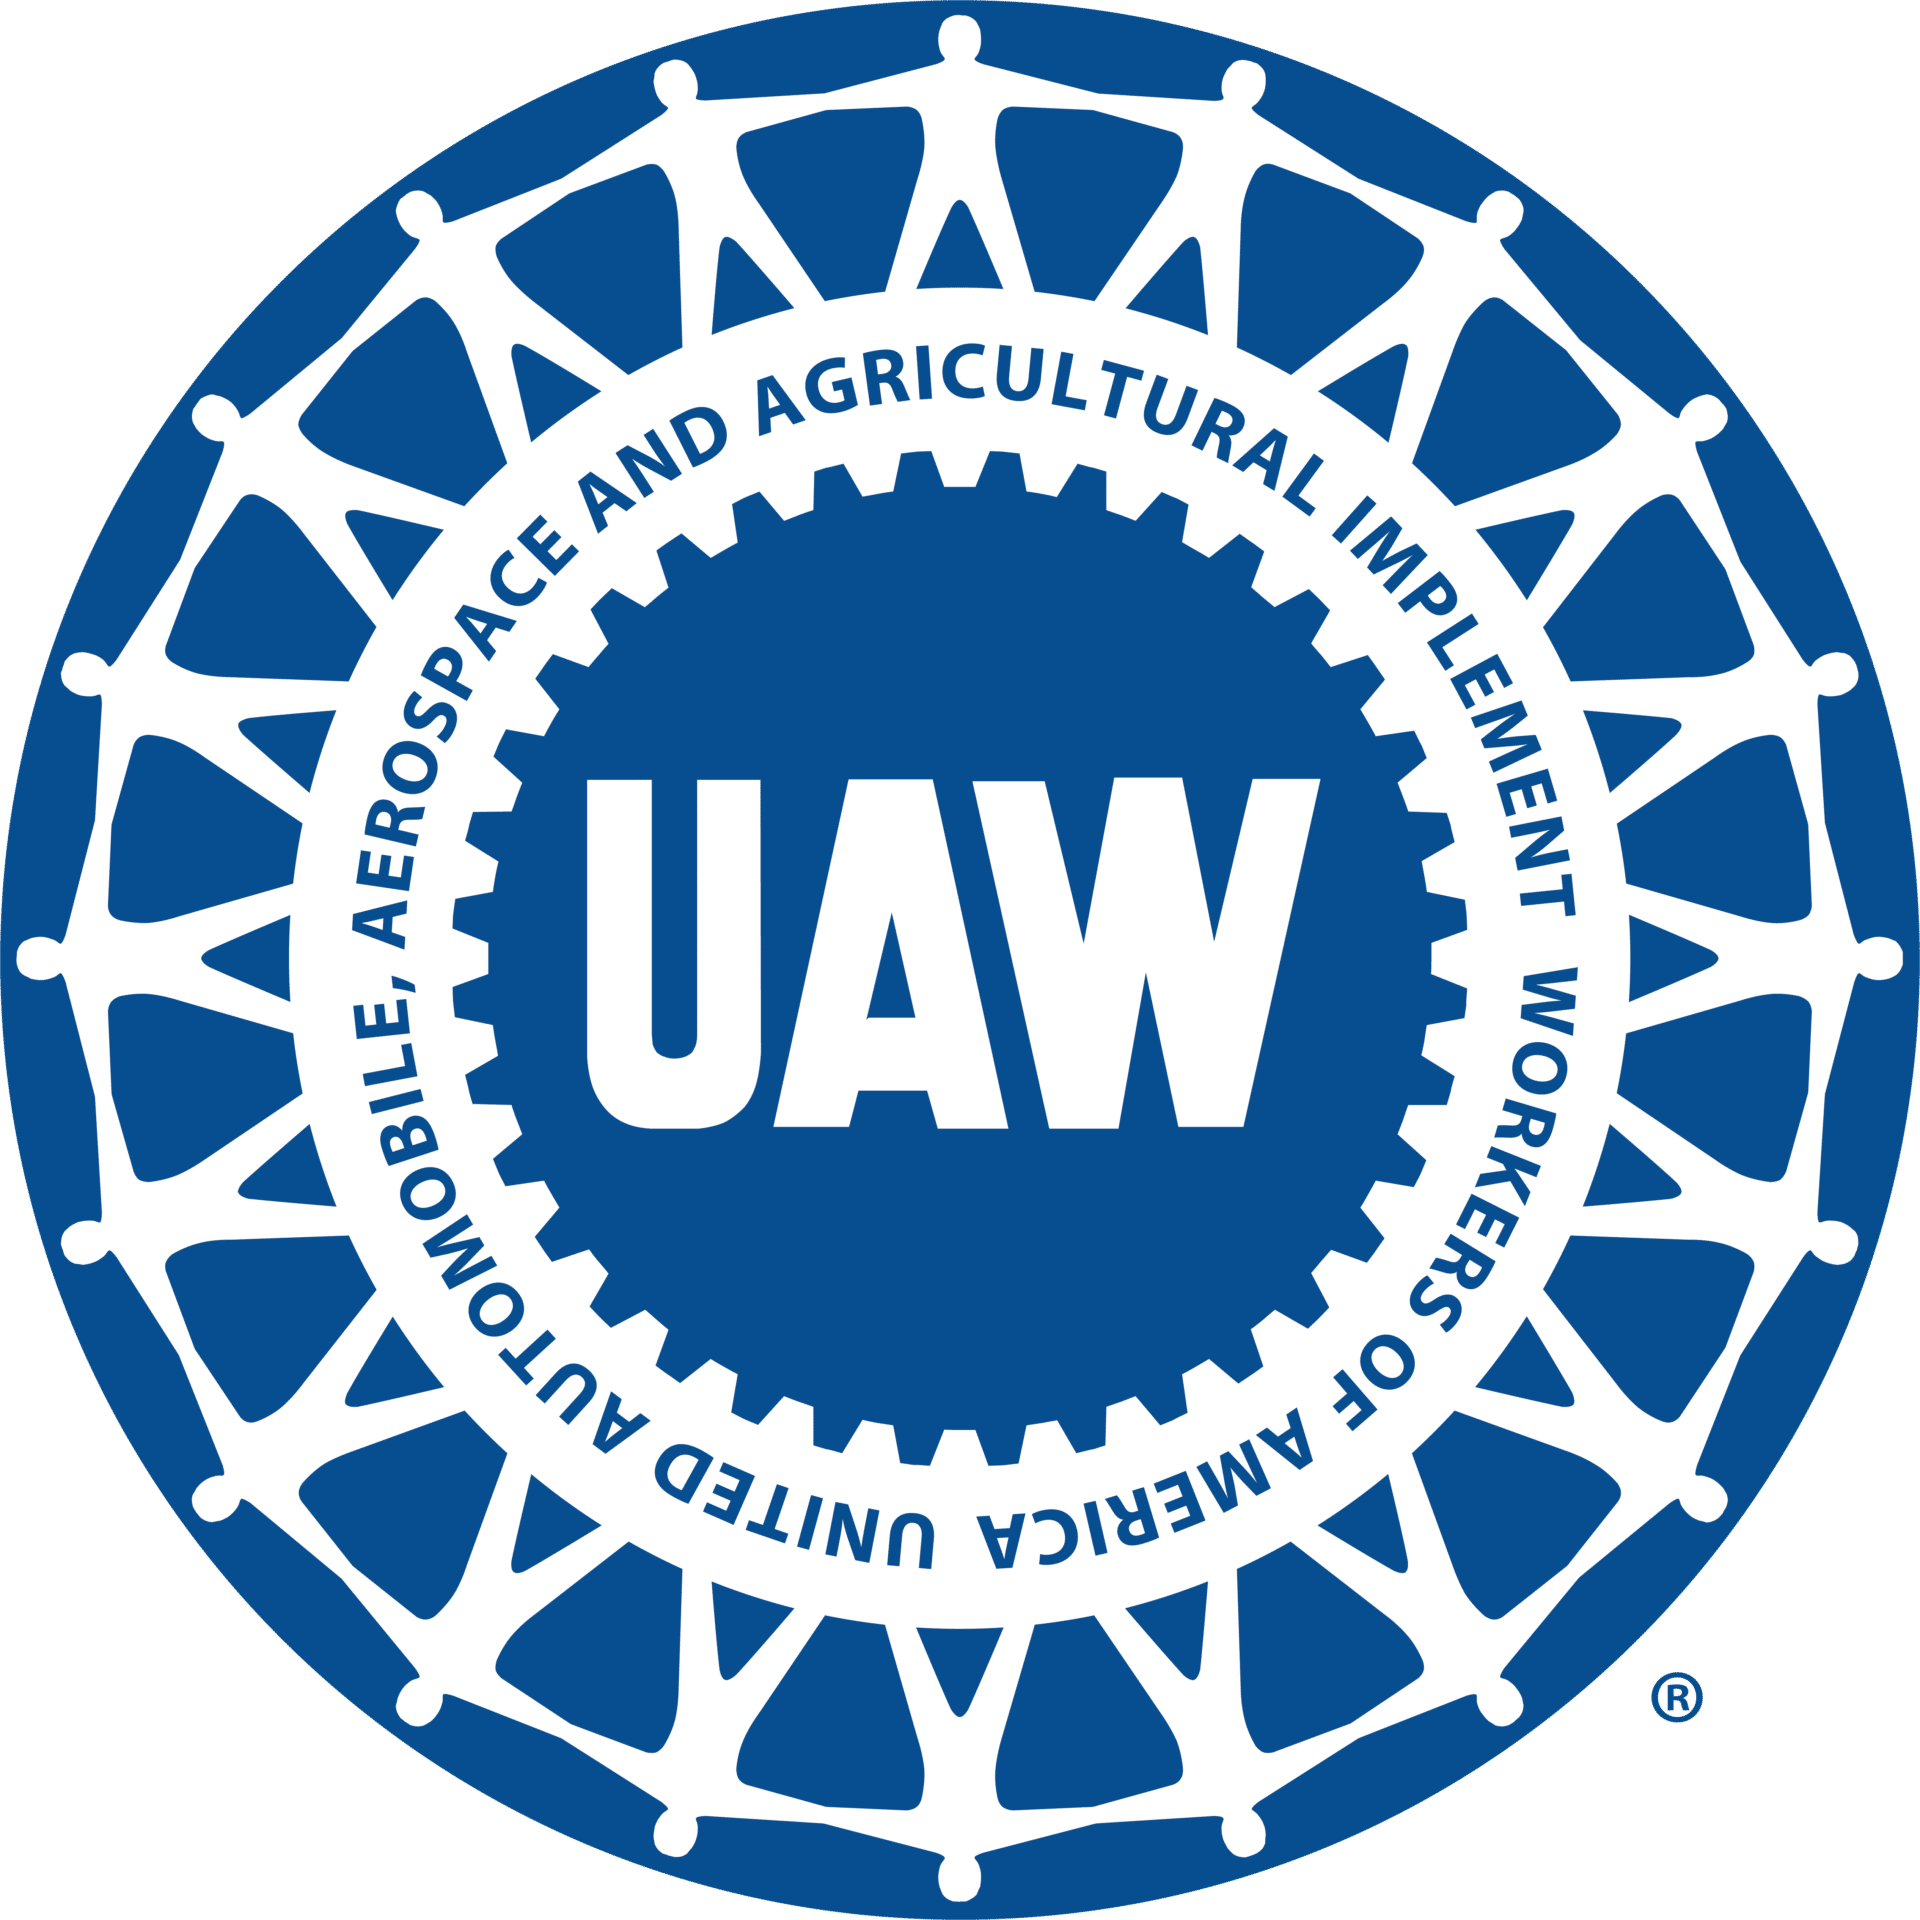 United Auto Workers